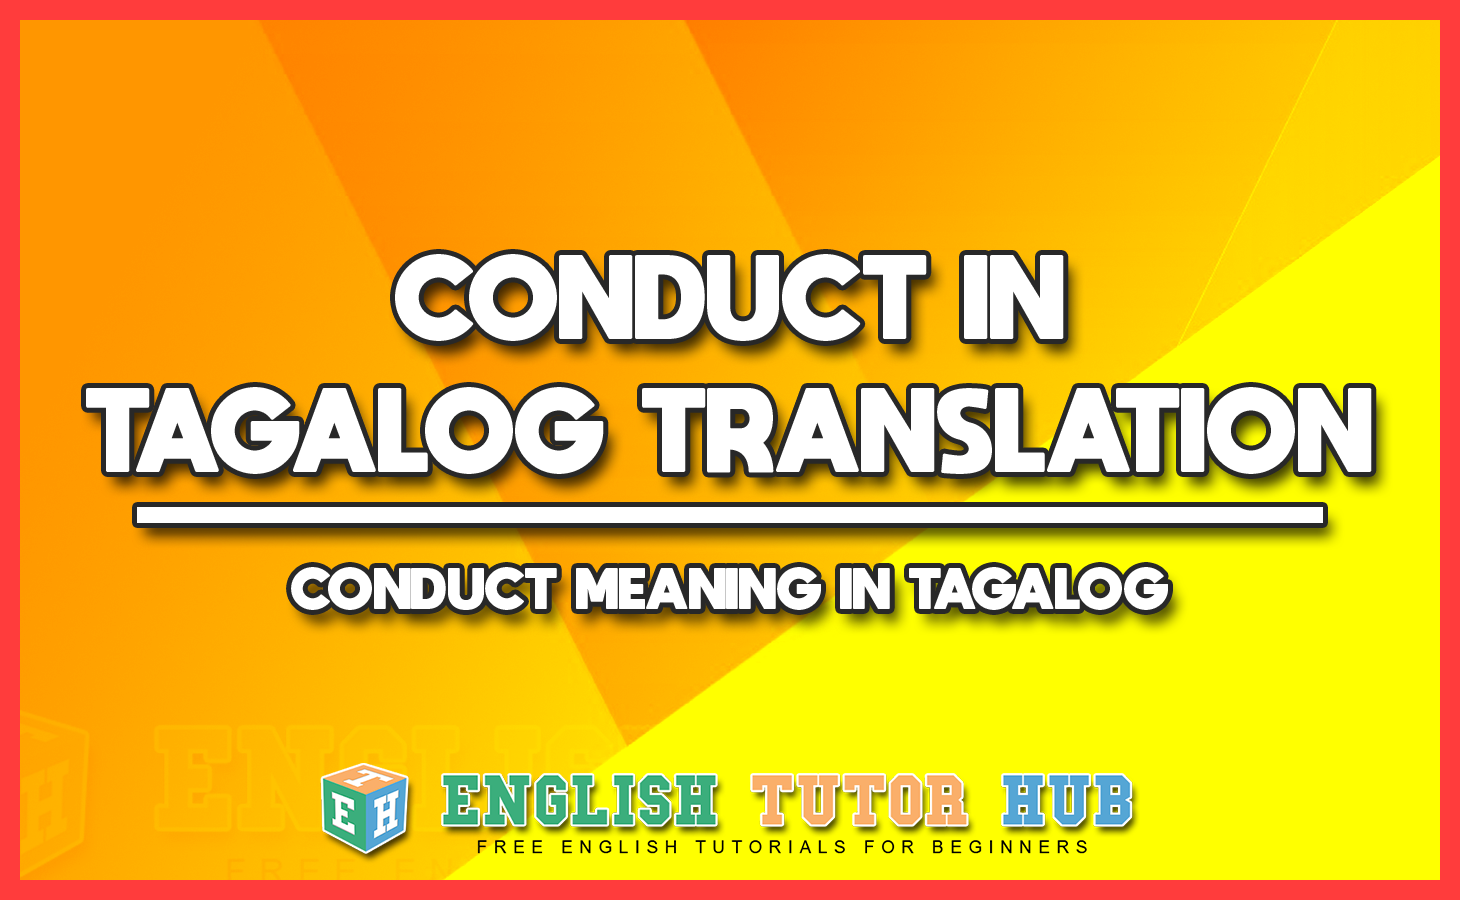 CONDUCT IN TAGALOG TRANSLATION - CONDUCT MEANING IN TAGALOG